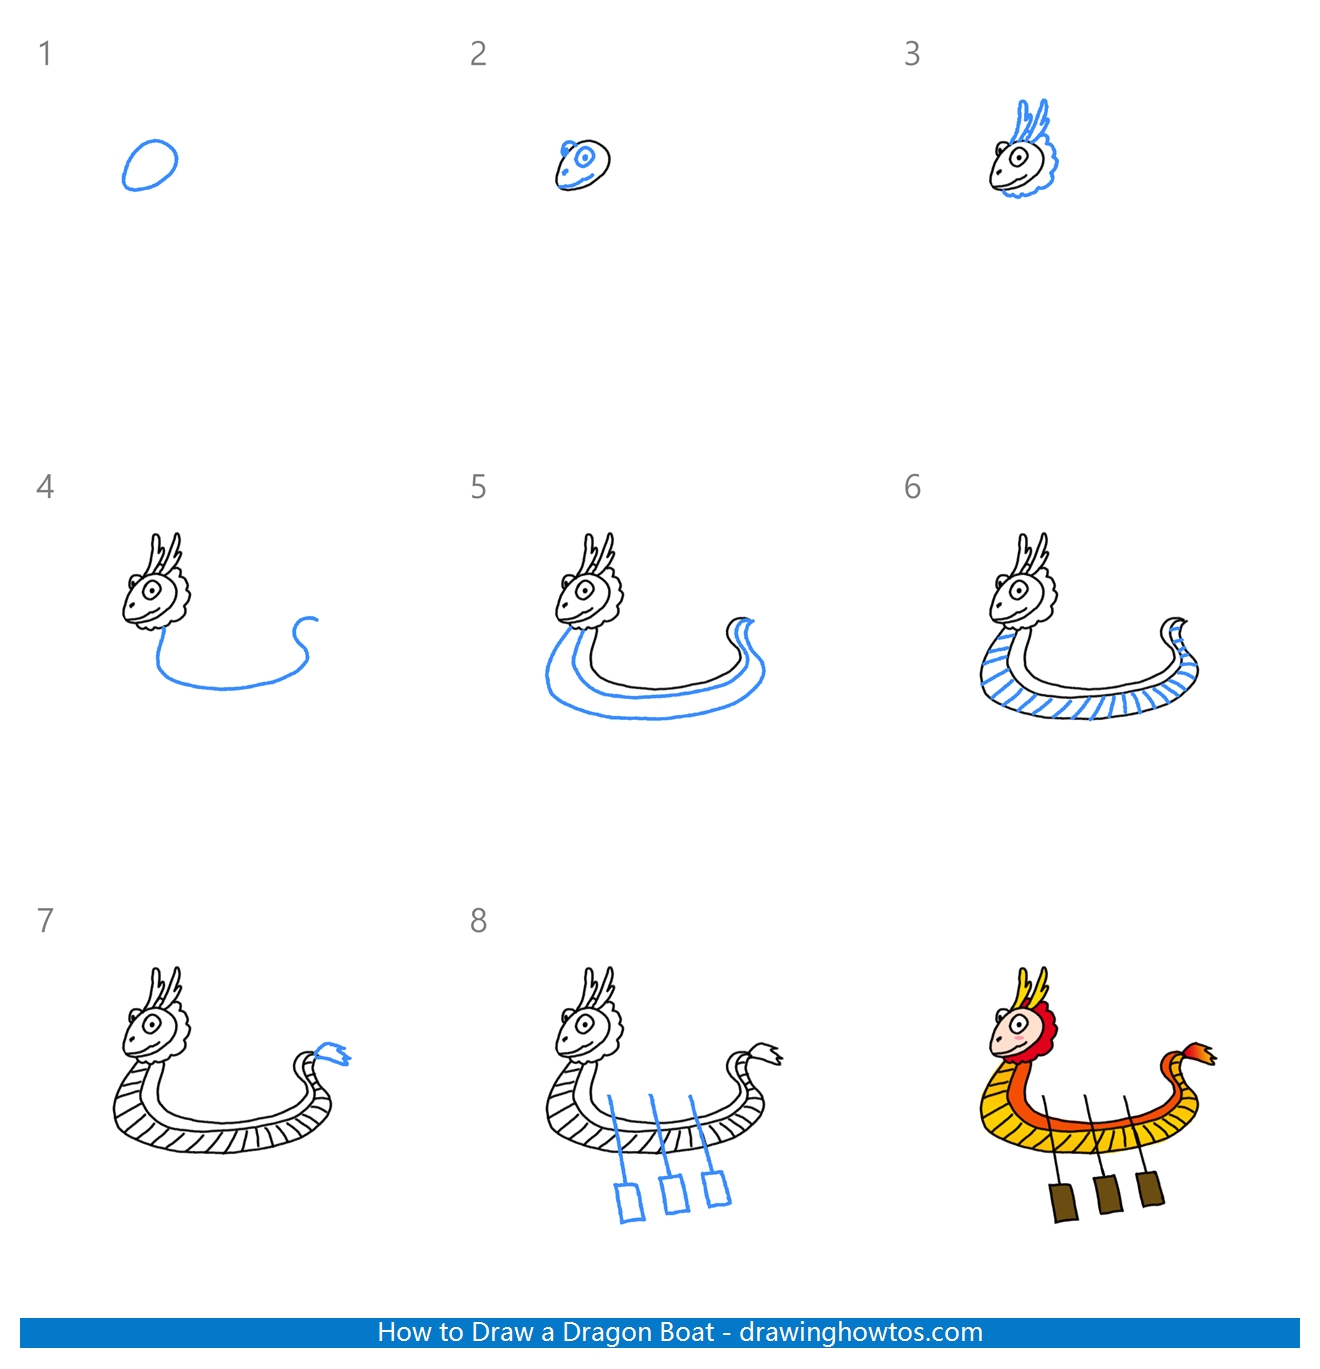 How to Draw a Dragon Boat Step by Step